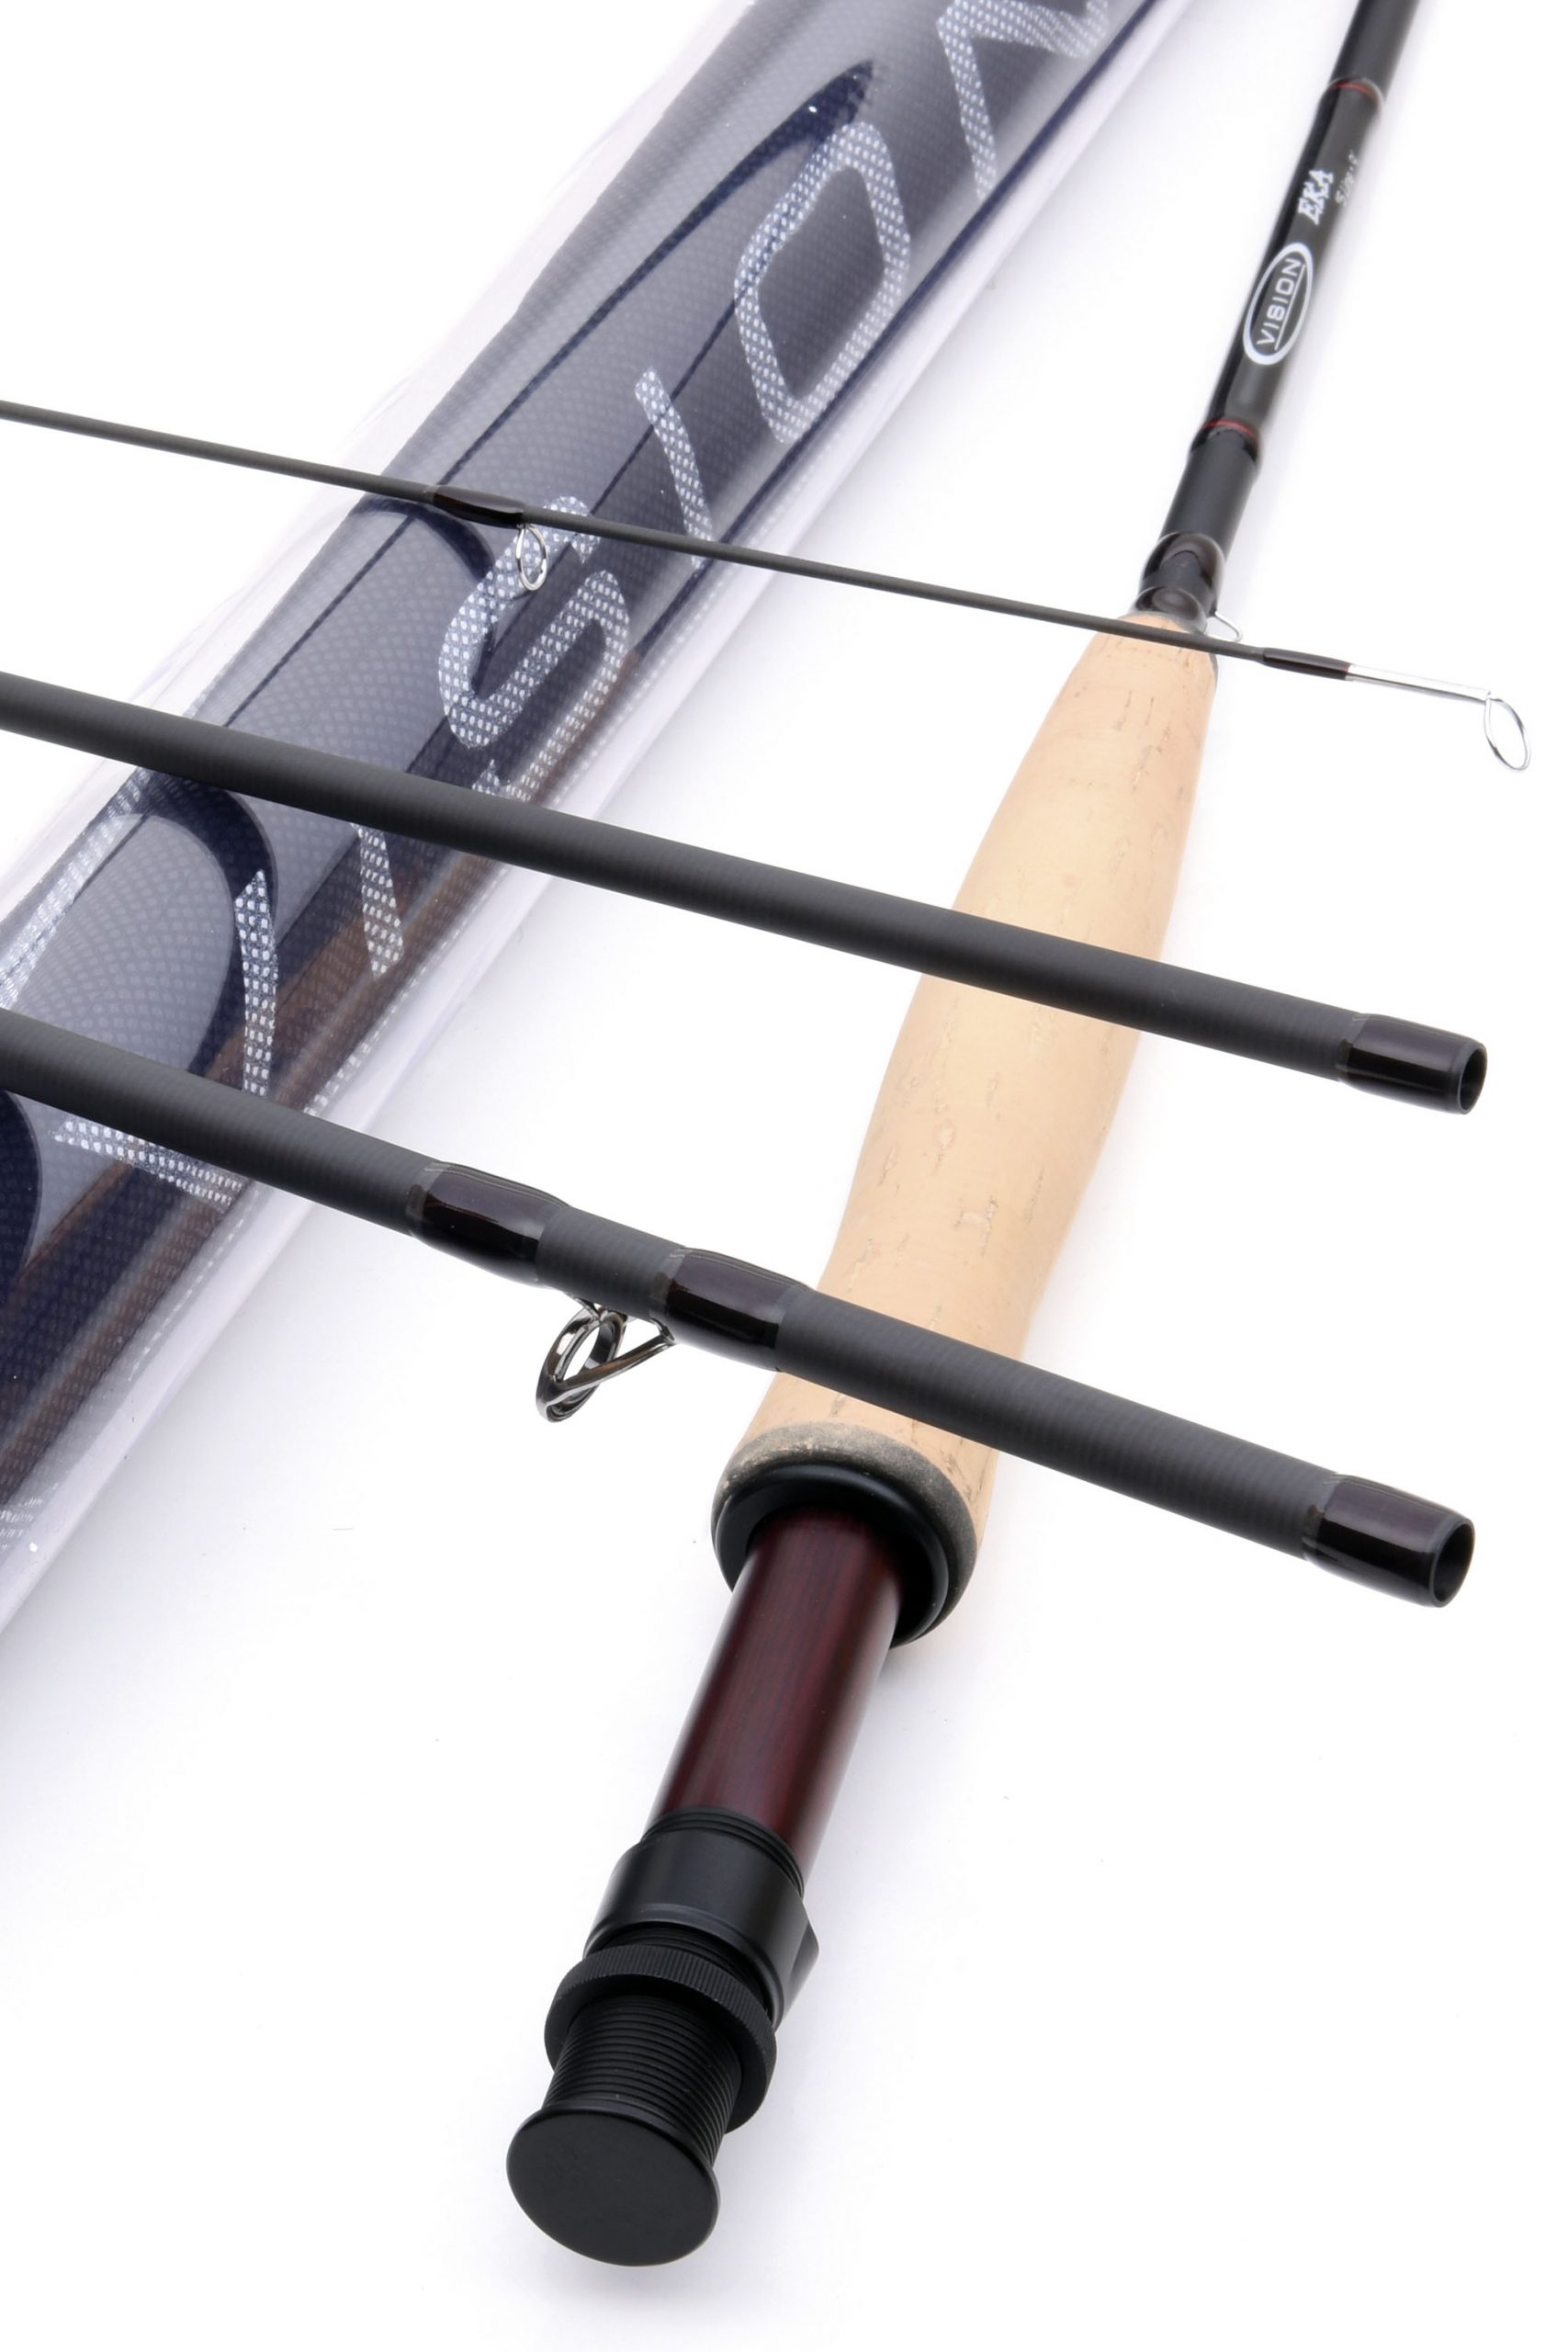 Vision Eka Fly Rod 9 Foot #6 For Fly Fishing (Length 9ft / 2.75m)